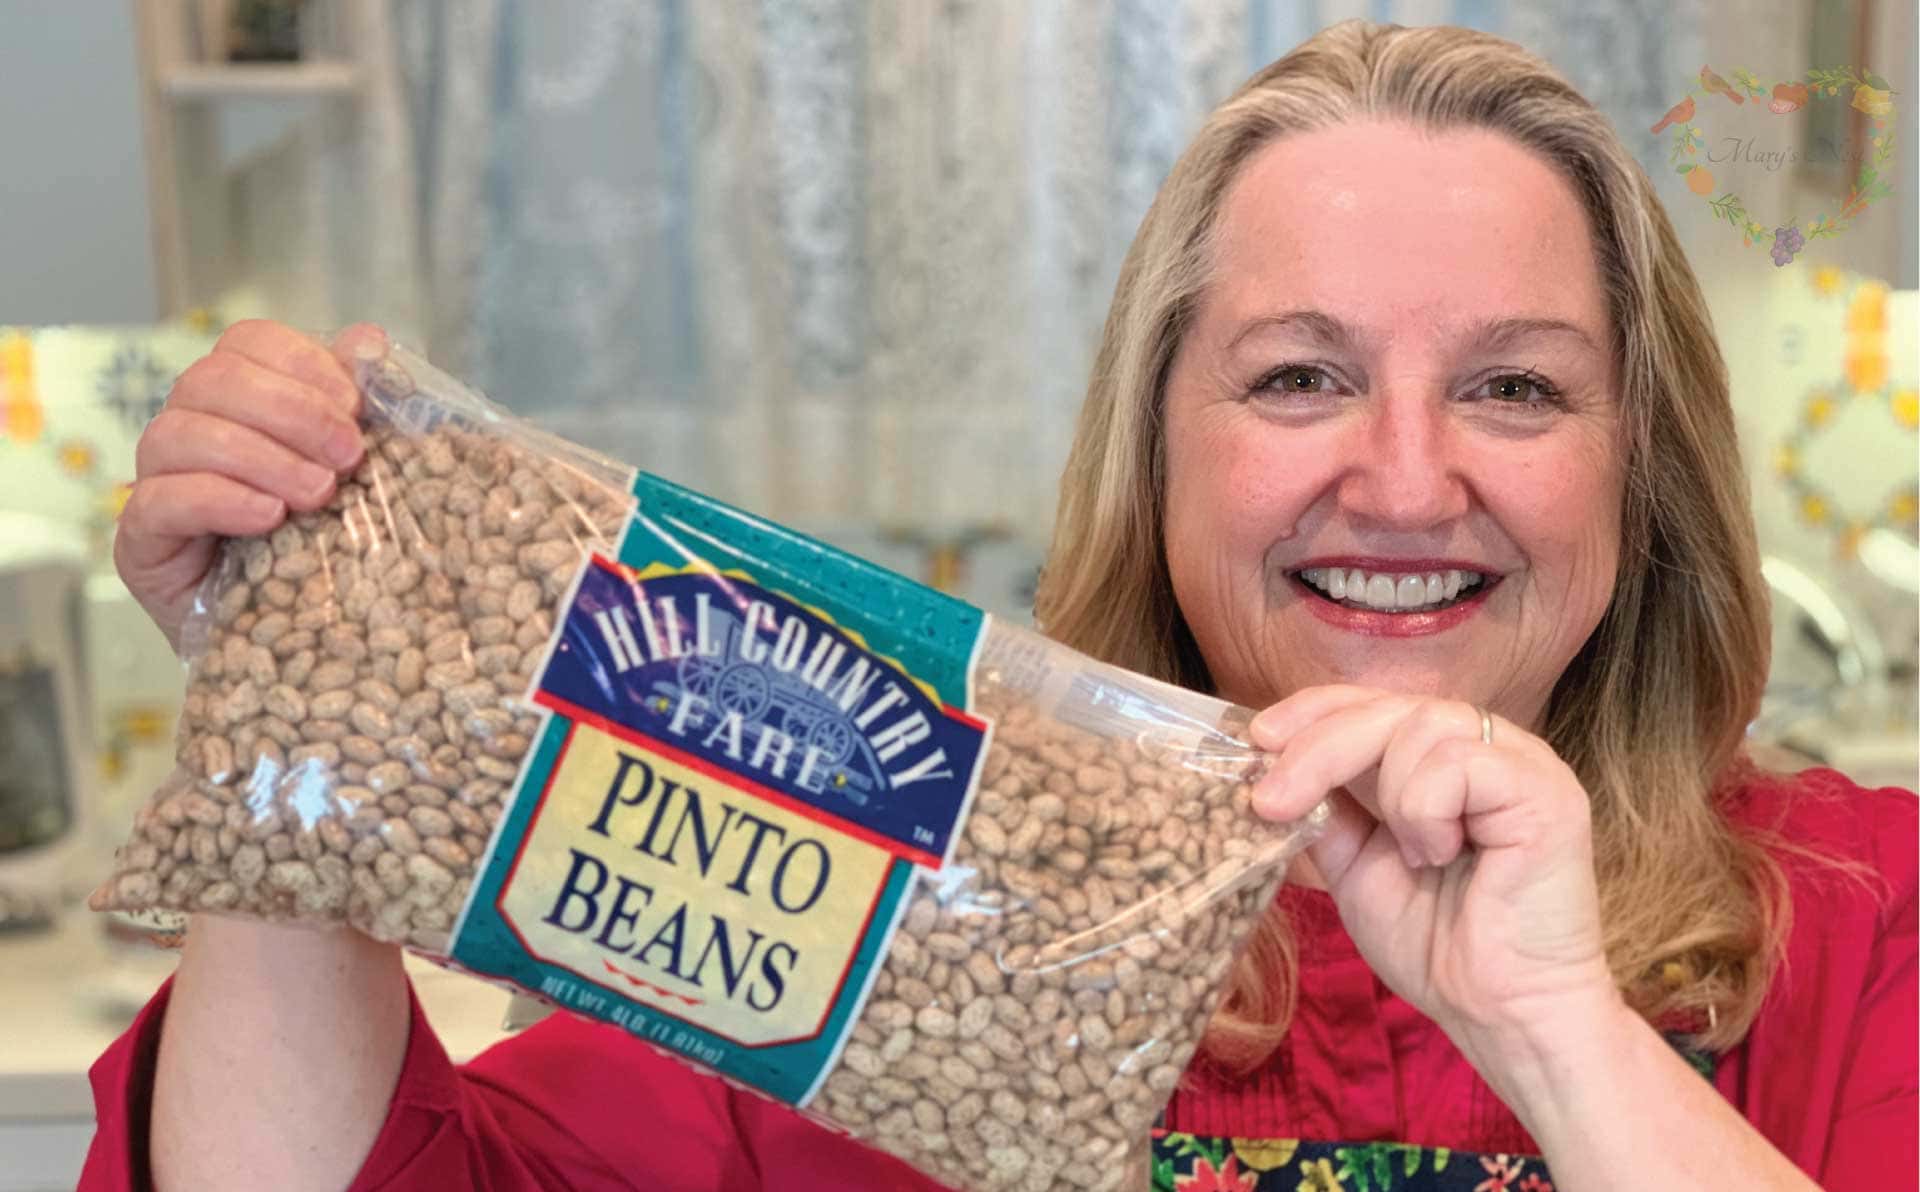 Mary holding a bag of pinto beans.